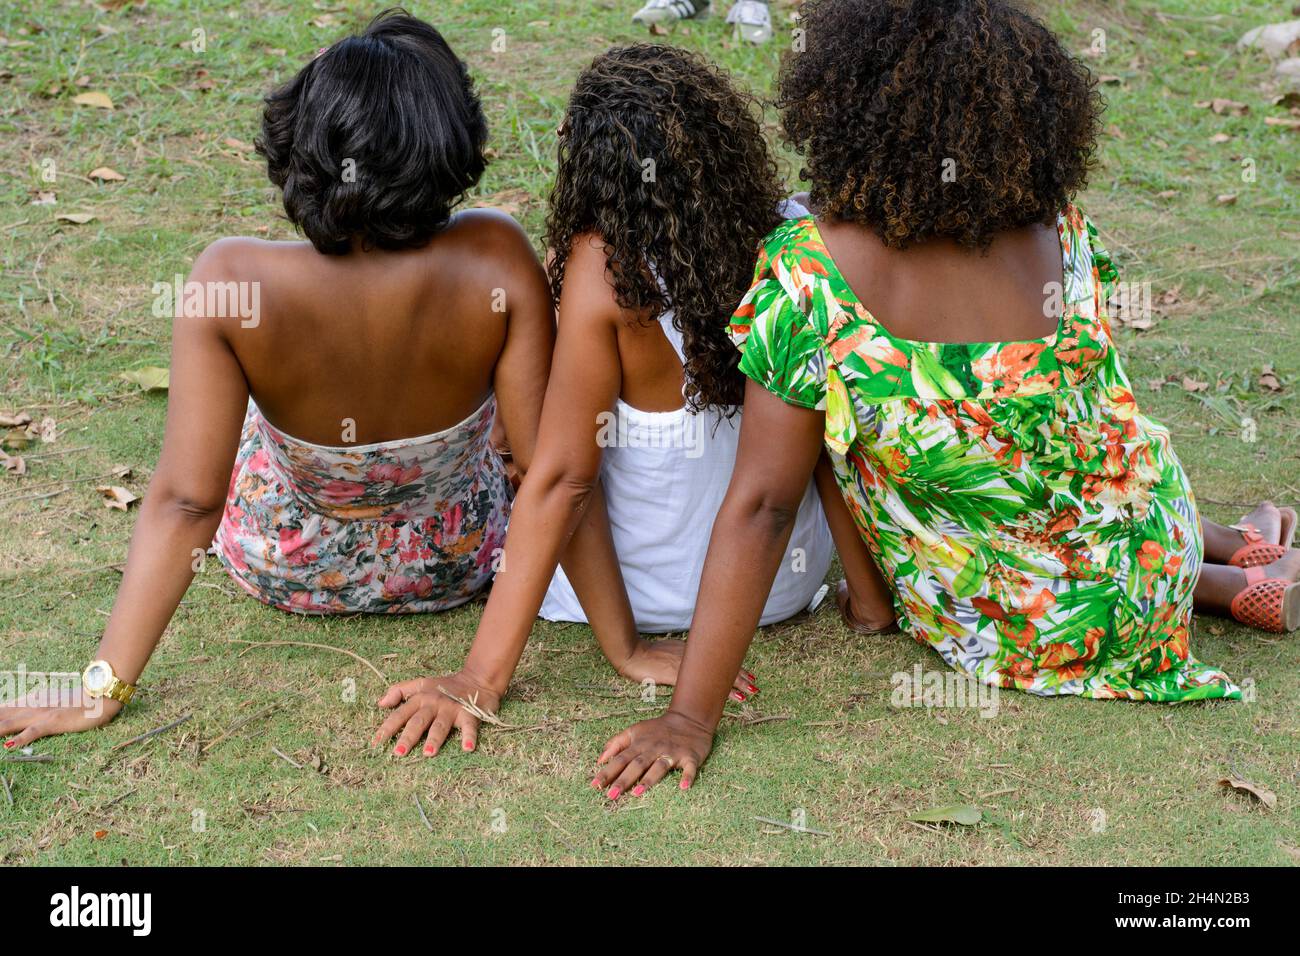 Three black woman posing for photo. They have their backs to the camera. Salvador, Bahia, Brazil. Stock Photo